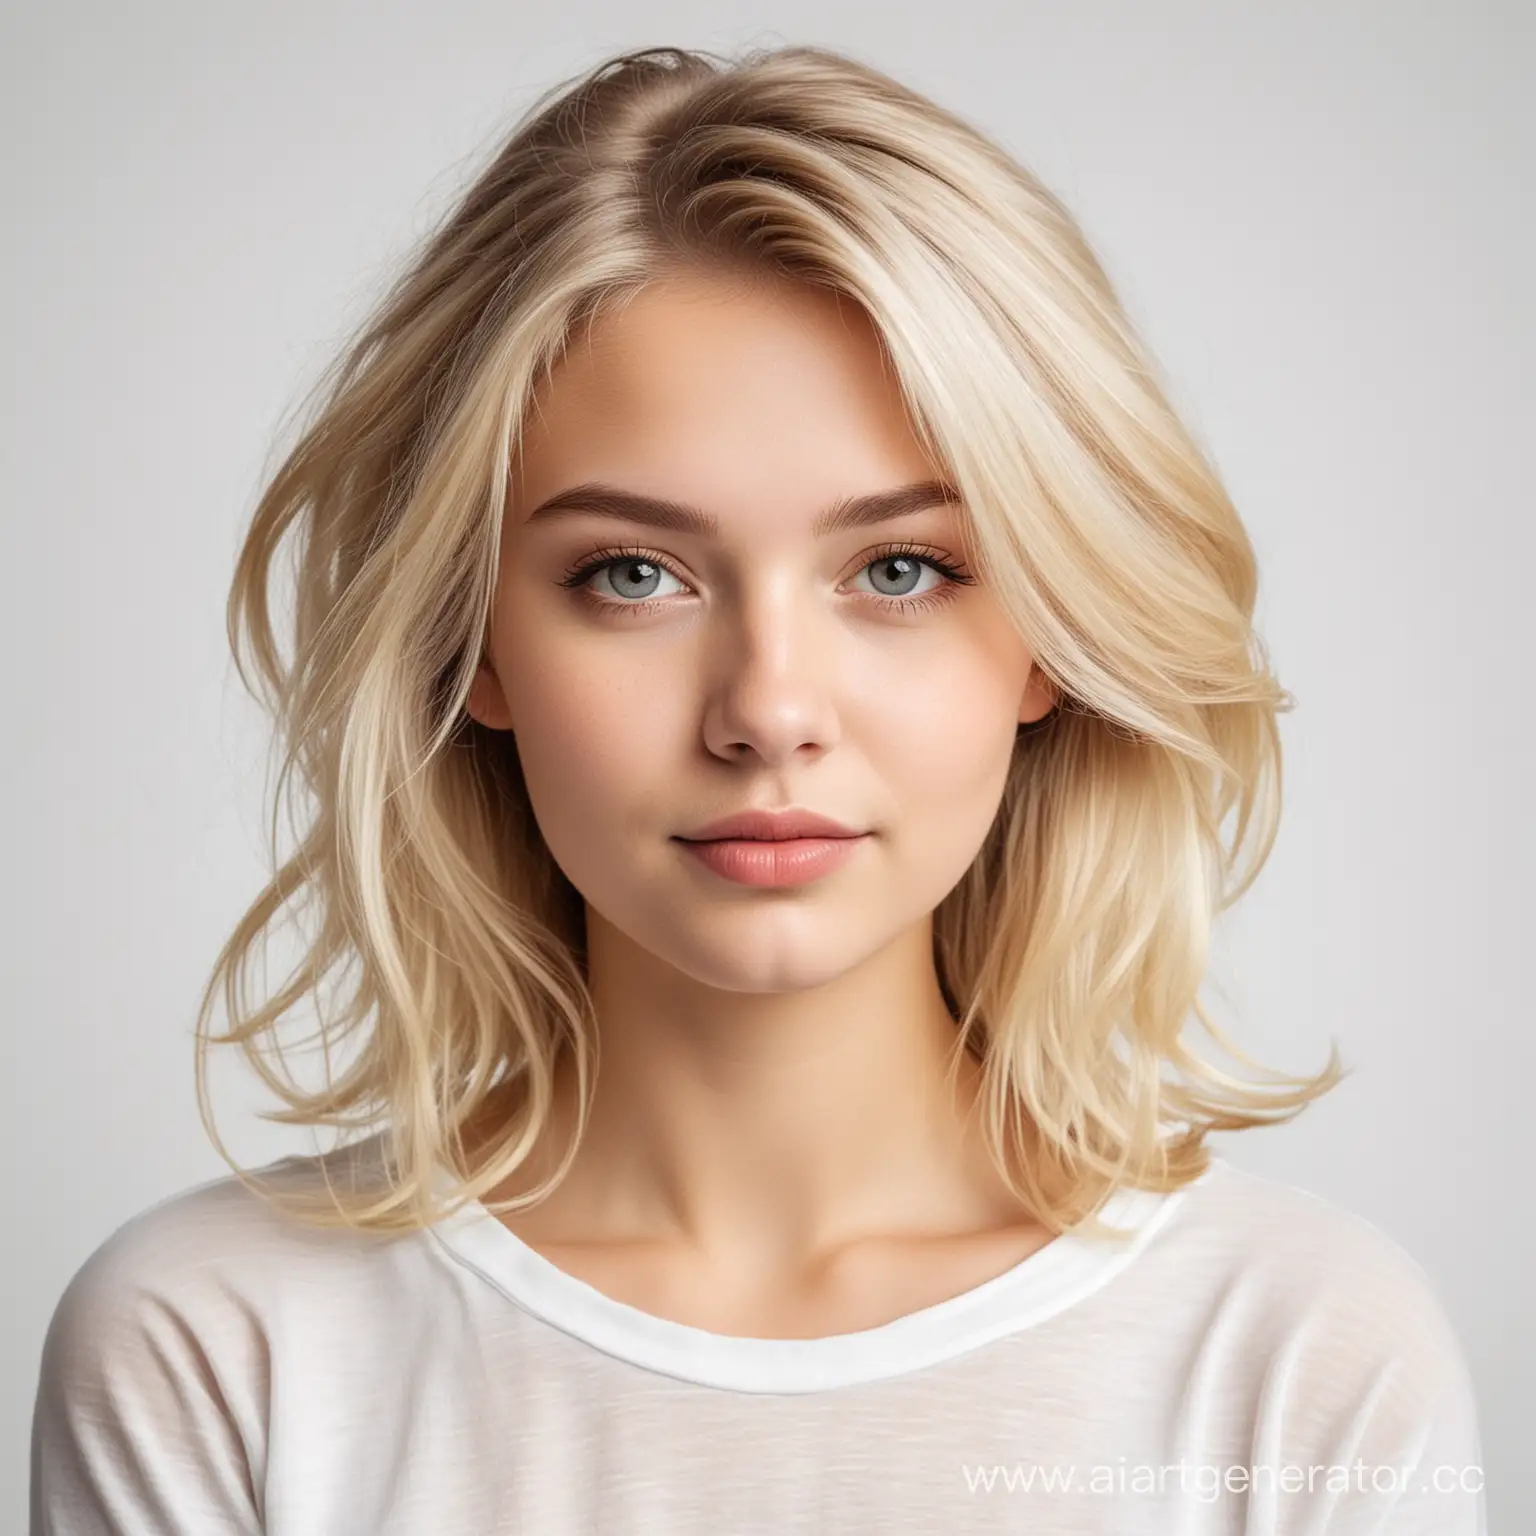 Blonde-Girl-Portrait-on-White-Background-with-Circular-Frame